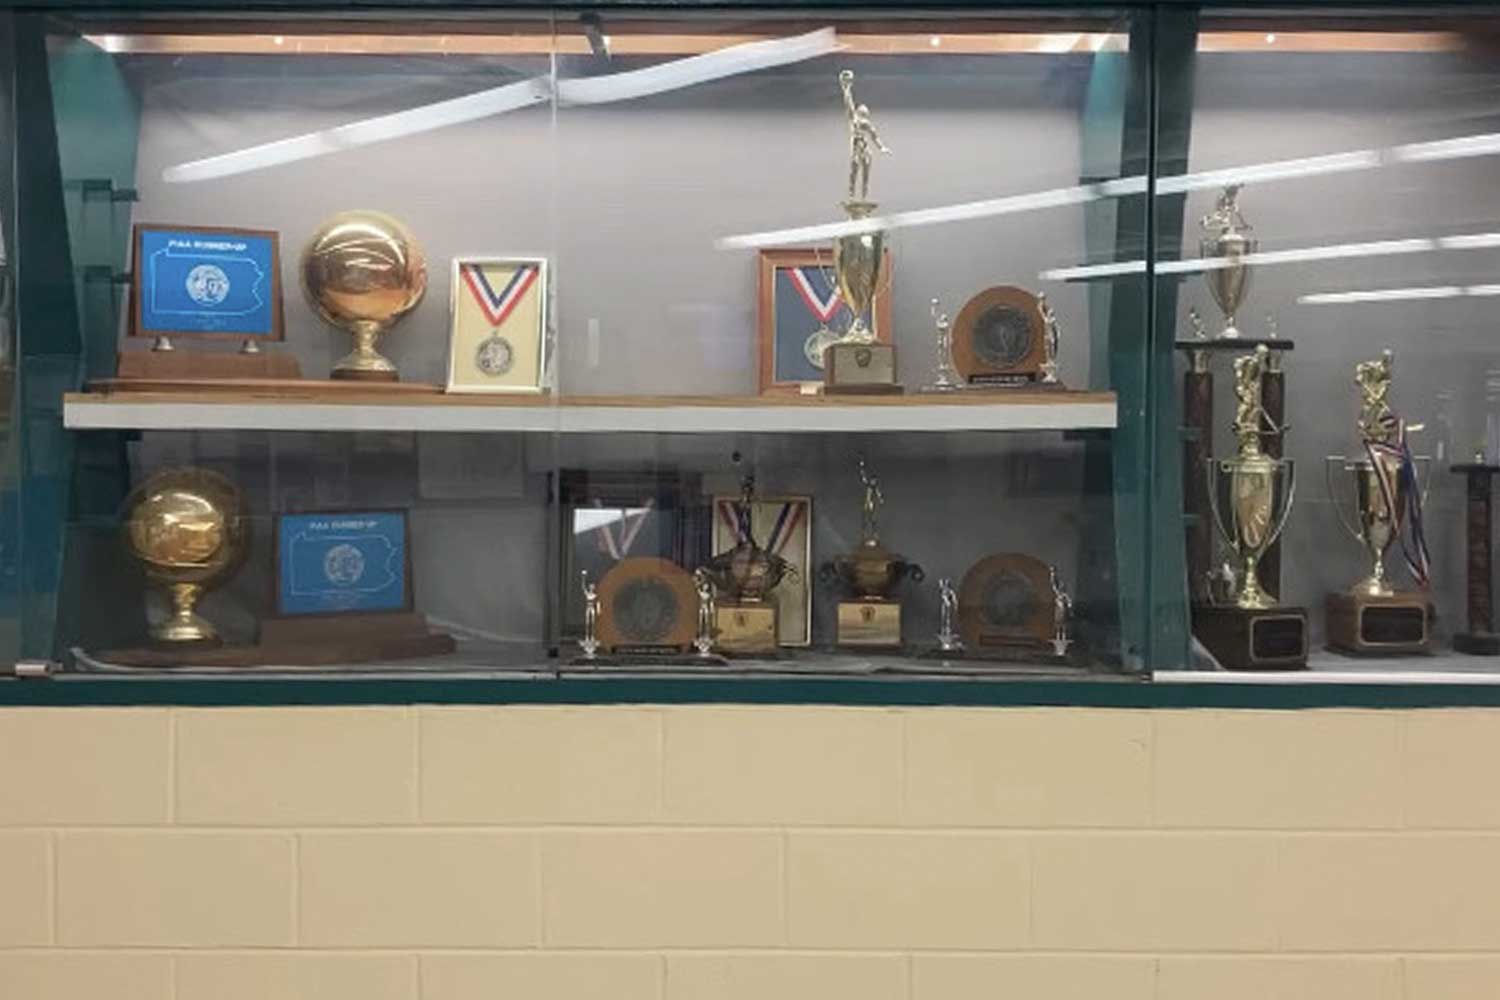 One of the large trophy cases in the second floor lobby.